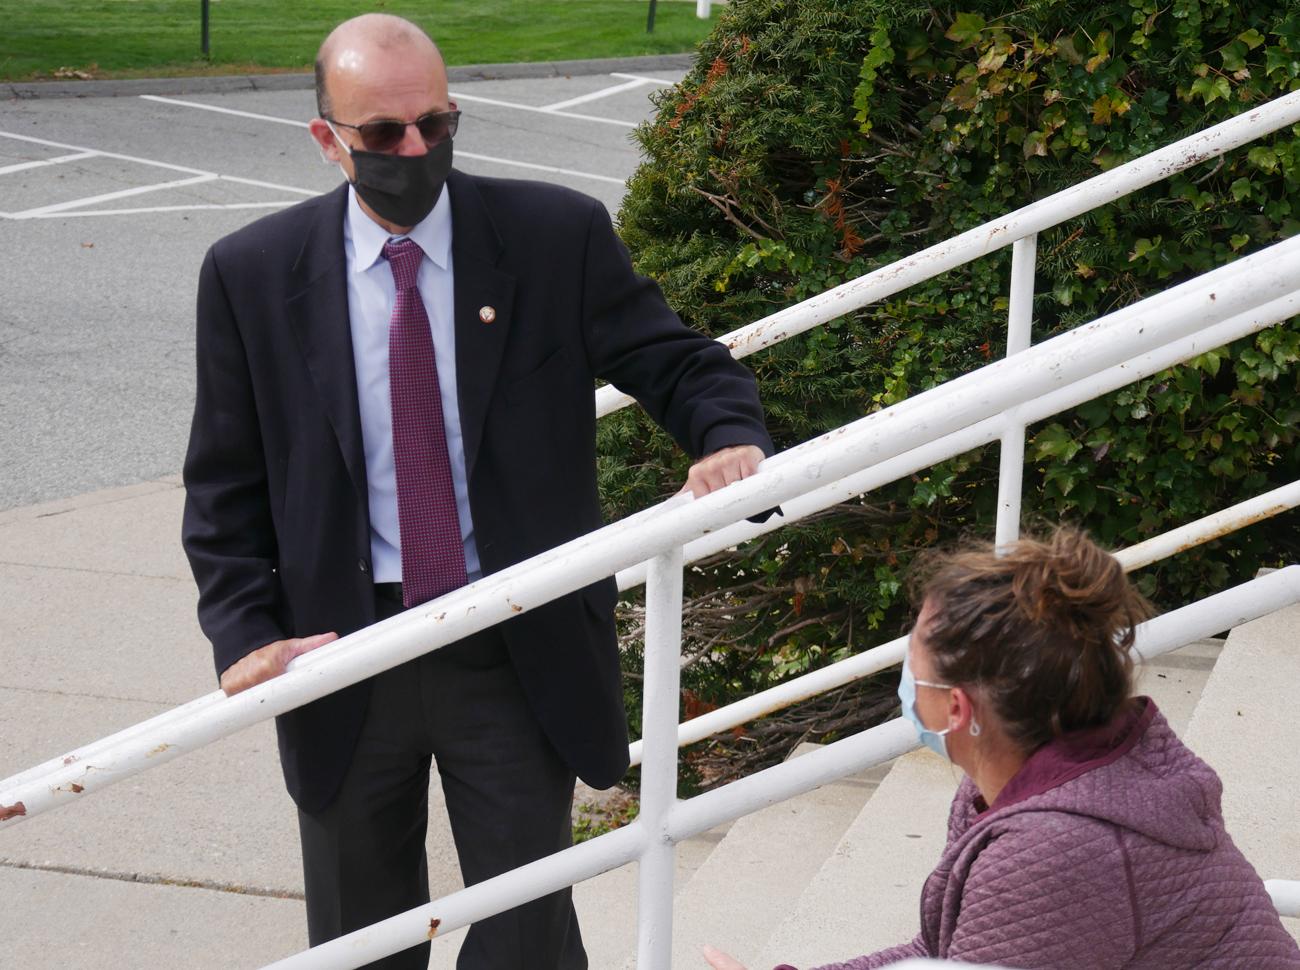 Criag Poisson, wearing a mask, is standing on the stairs of Blake Arena talking with Women's Lacrosse Head Coach Kristen Mullady, who is sitting on the steps